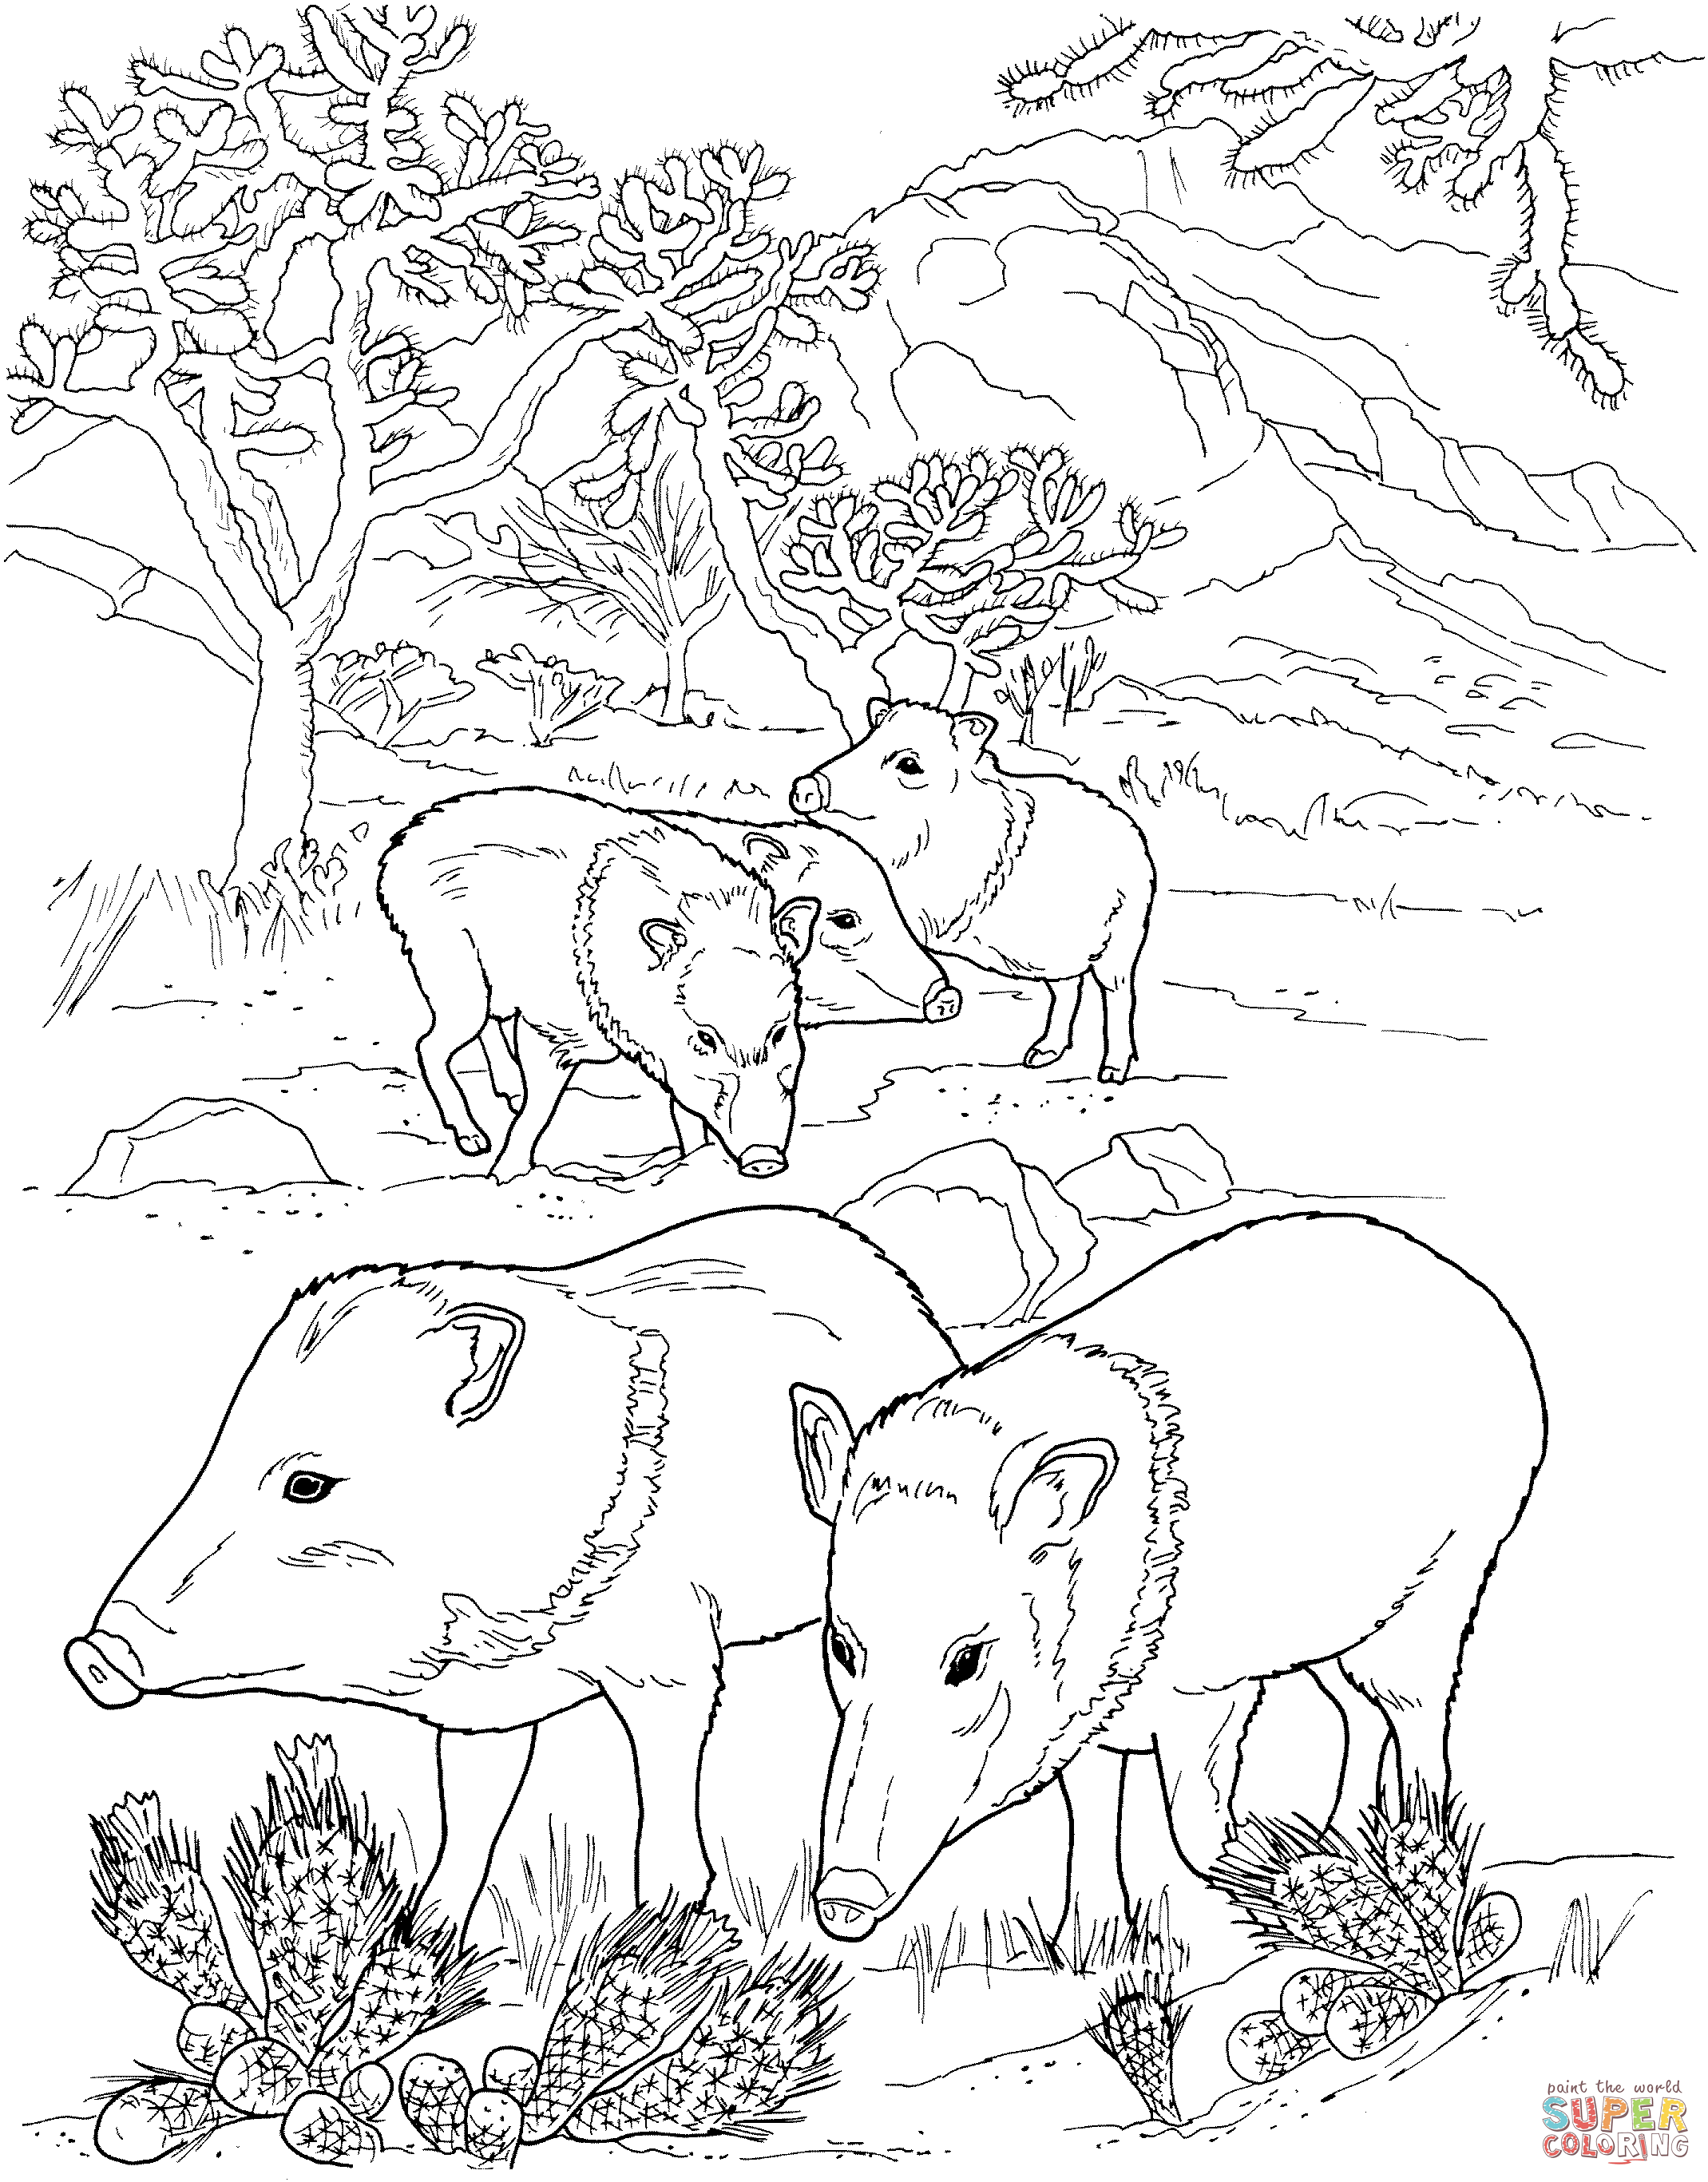 Javelina peccaries wild pigs coloring page free printable coloring pages